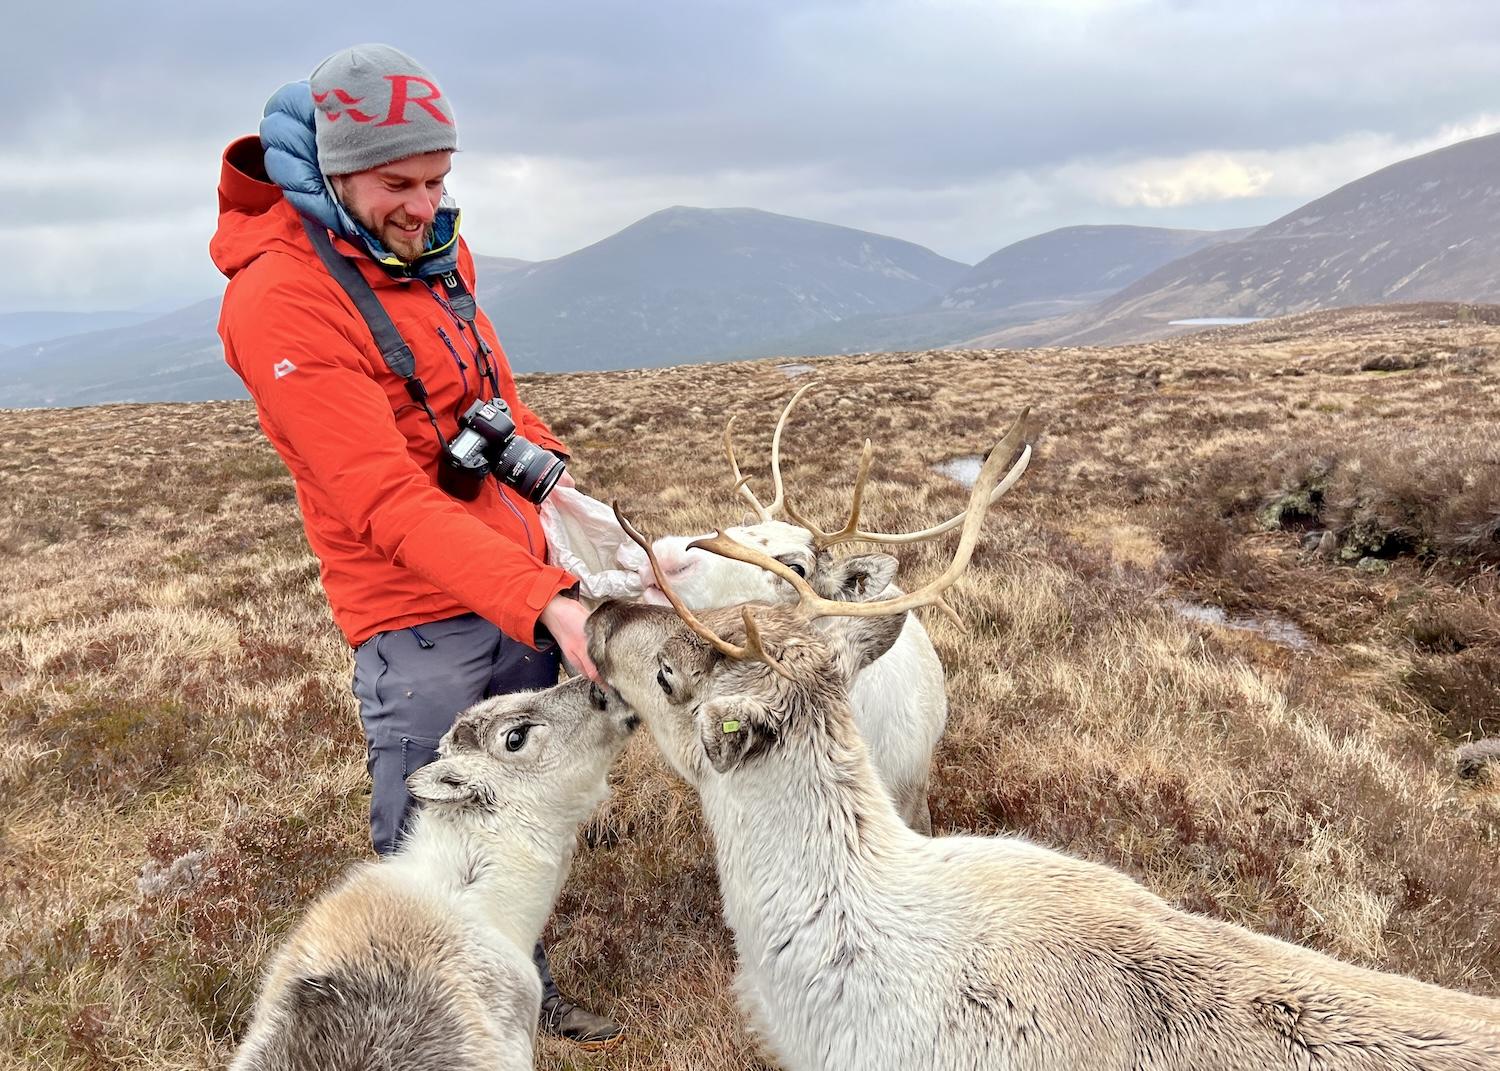 Joe Mann is a guide with Wilderness Scotland, an adventure holiday company, and a seasonal herder with the Cairngorm Reindeer Herd.